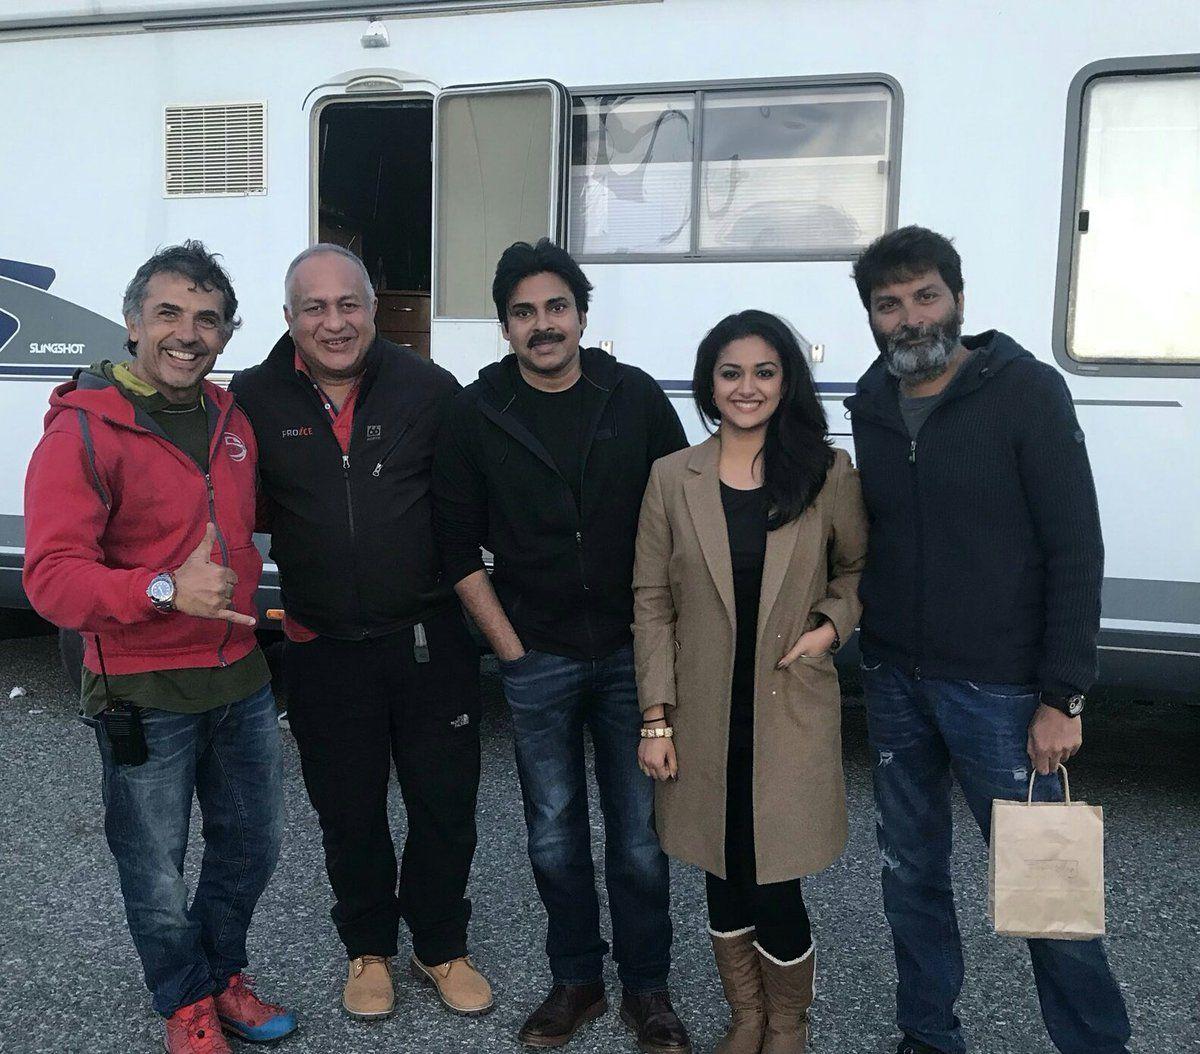 Leaked Exclusive: Powerstar from the sets of PSPK25 Movie